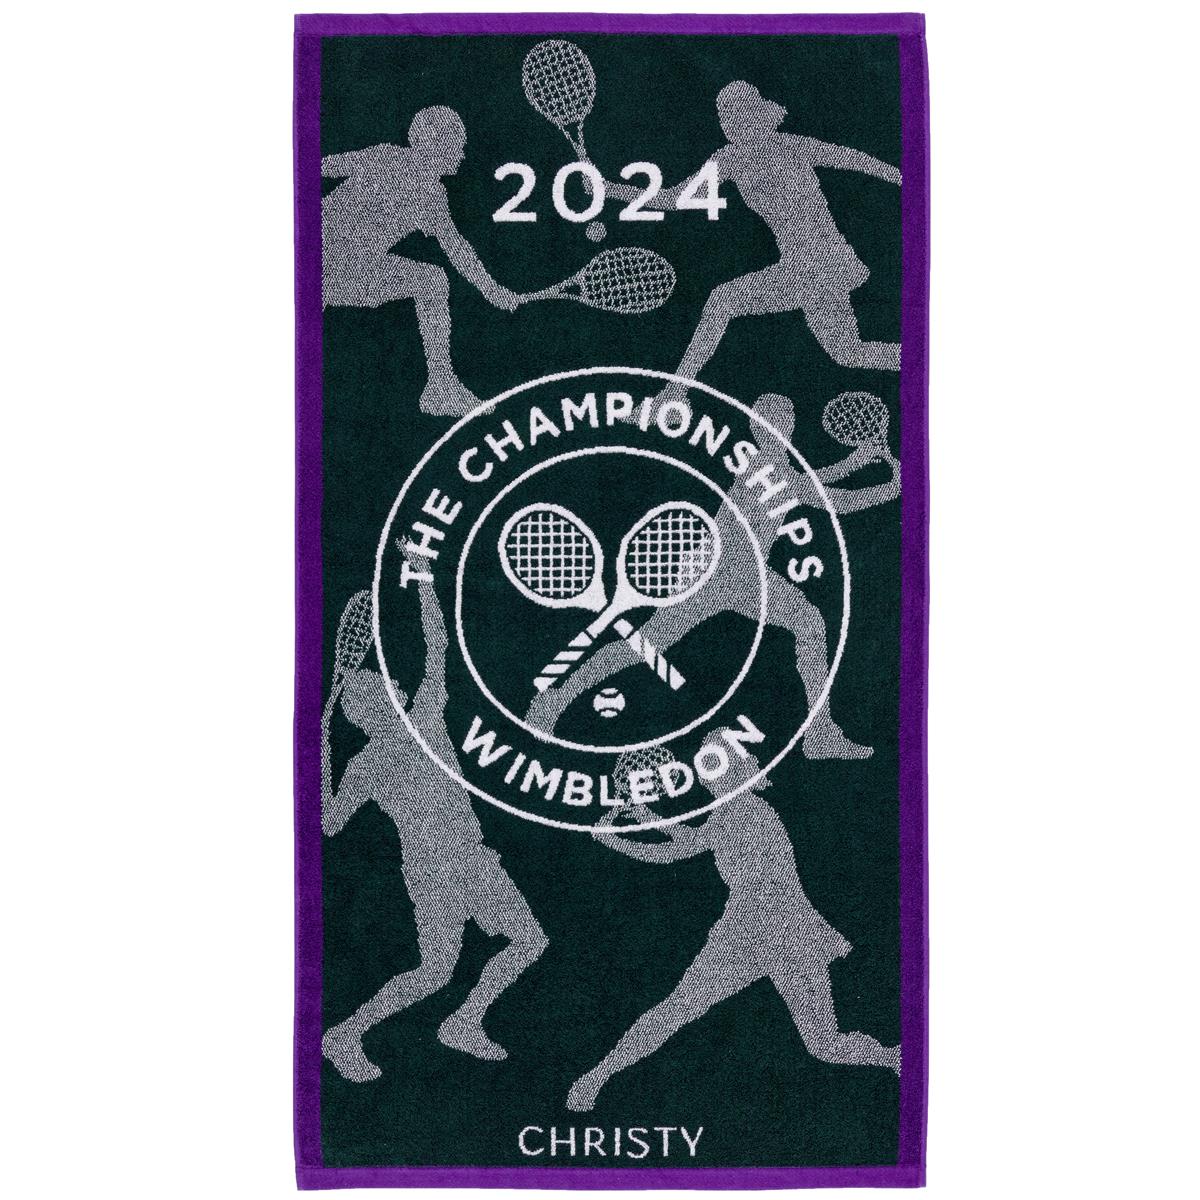 Christy Wimbledon Championship 2024 Towel Questions & Answers